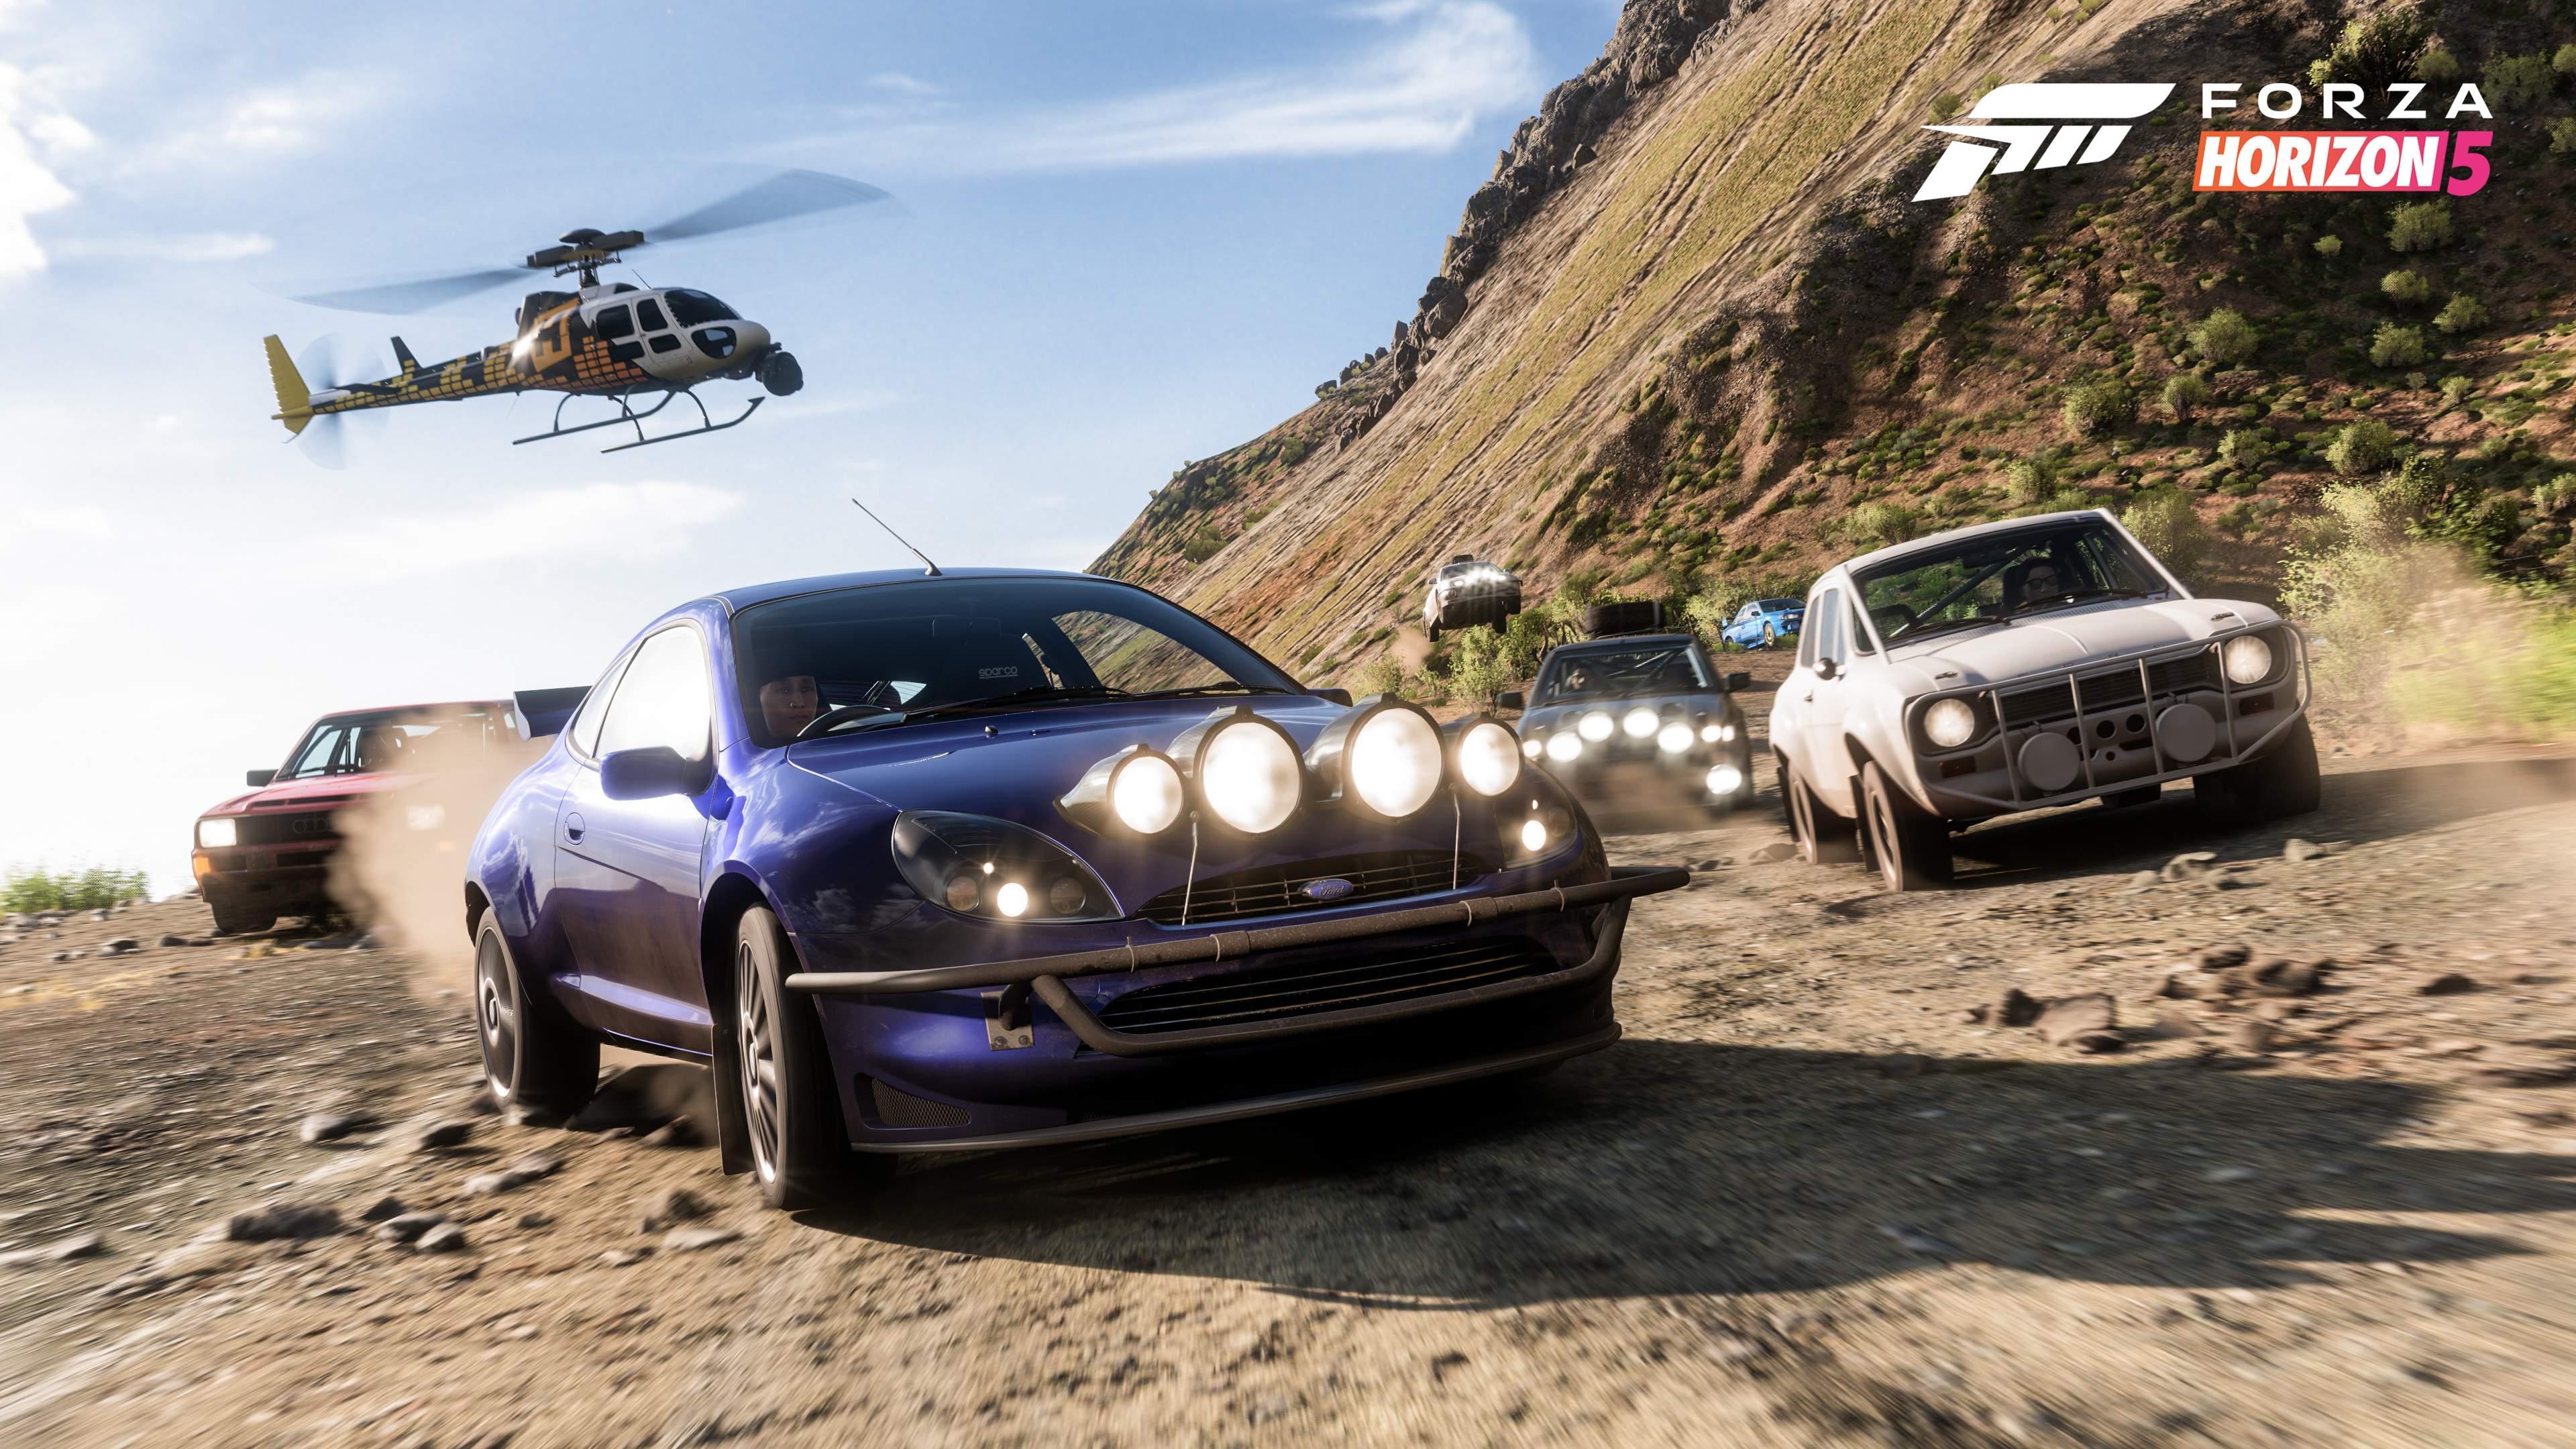 Forza Horizon 5 xbox wireframe image rally cars driving with helicopter